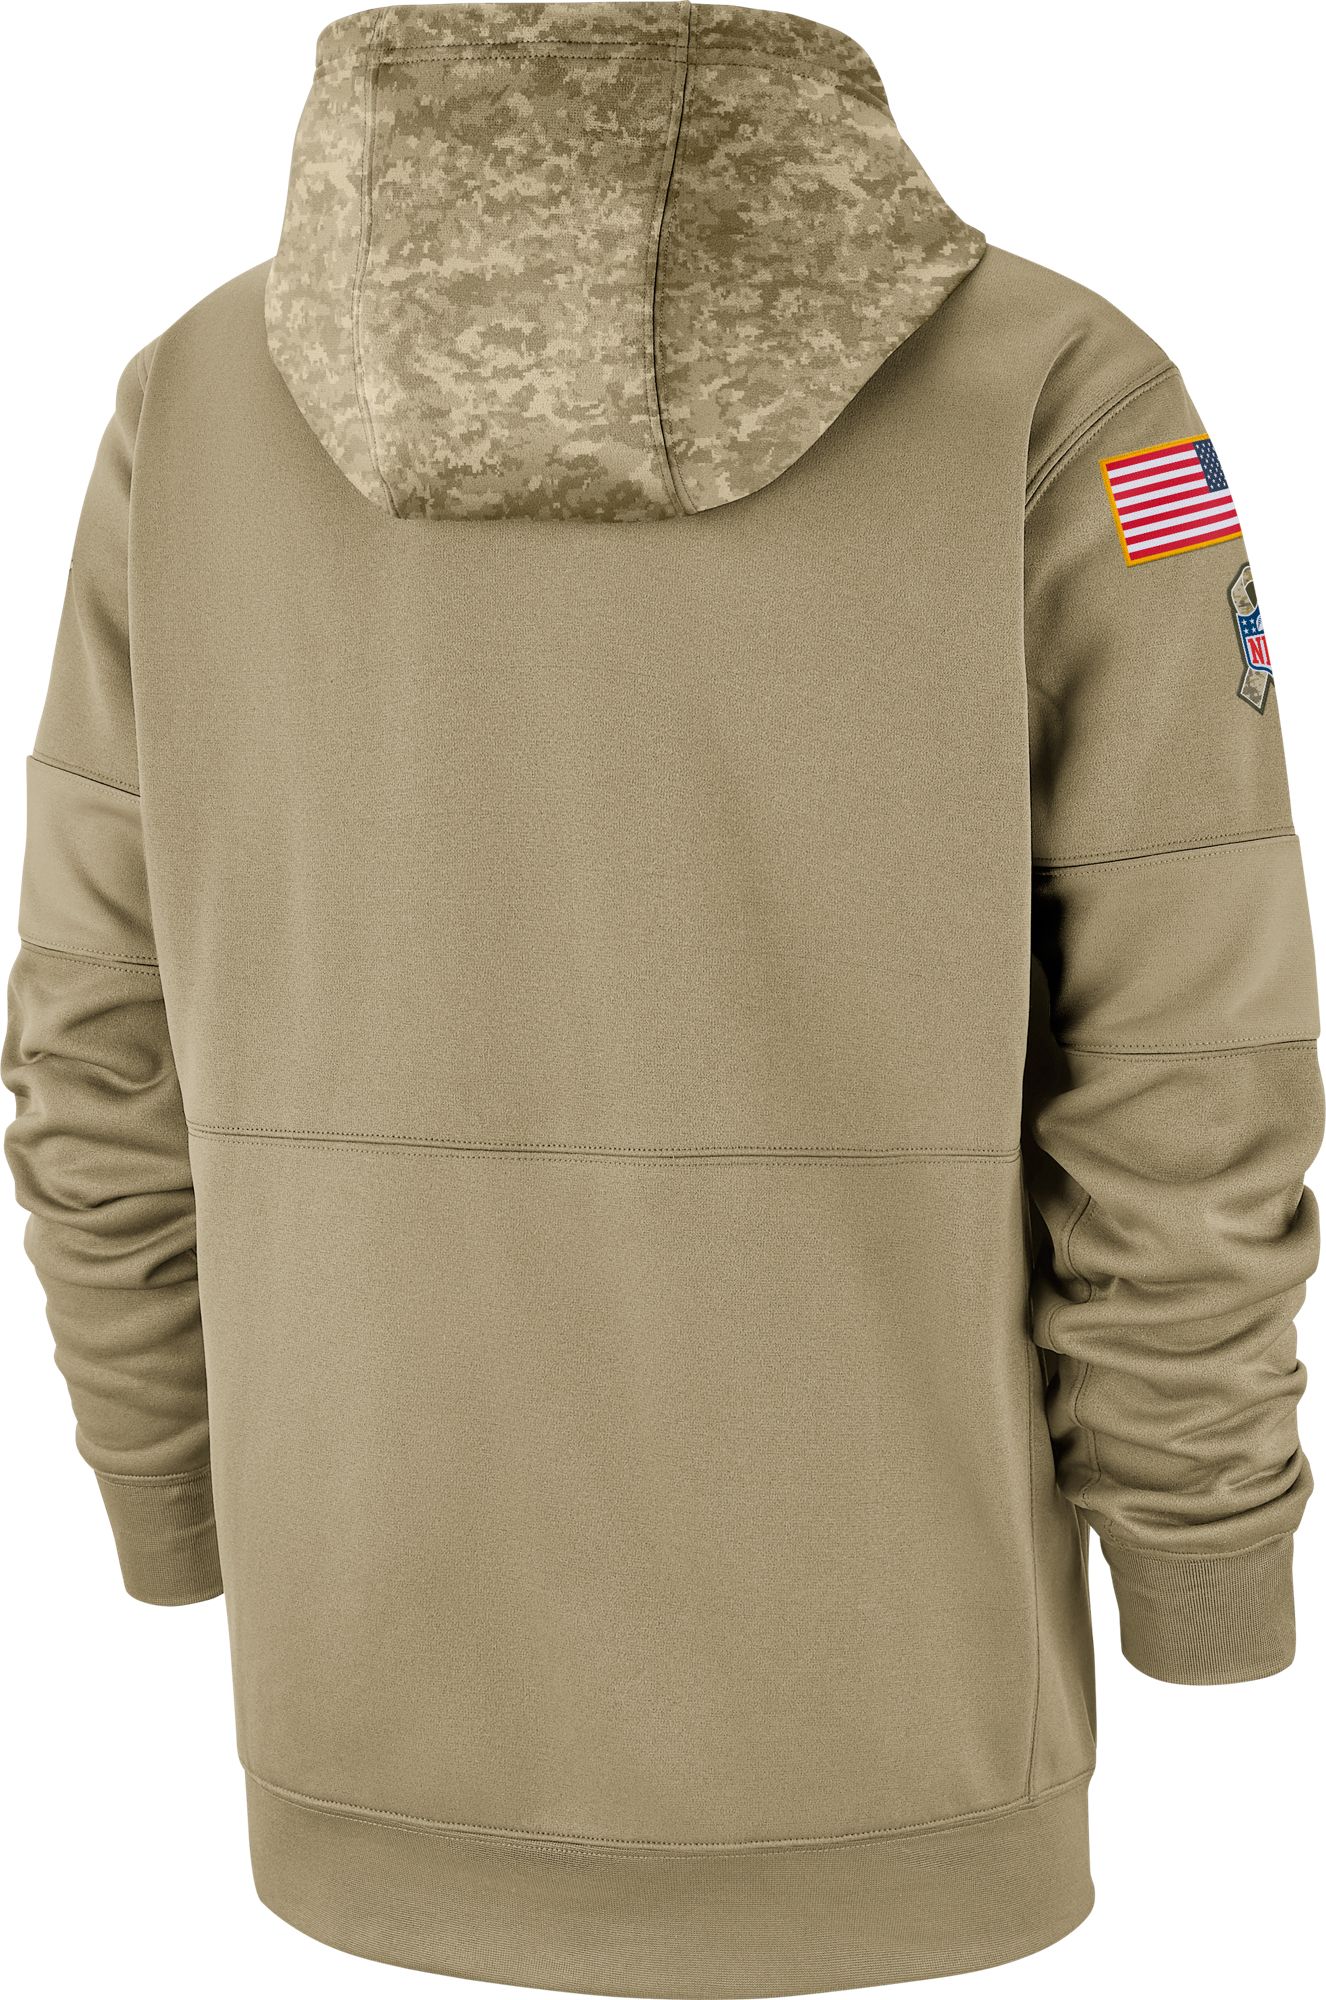 hoodie salute to service